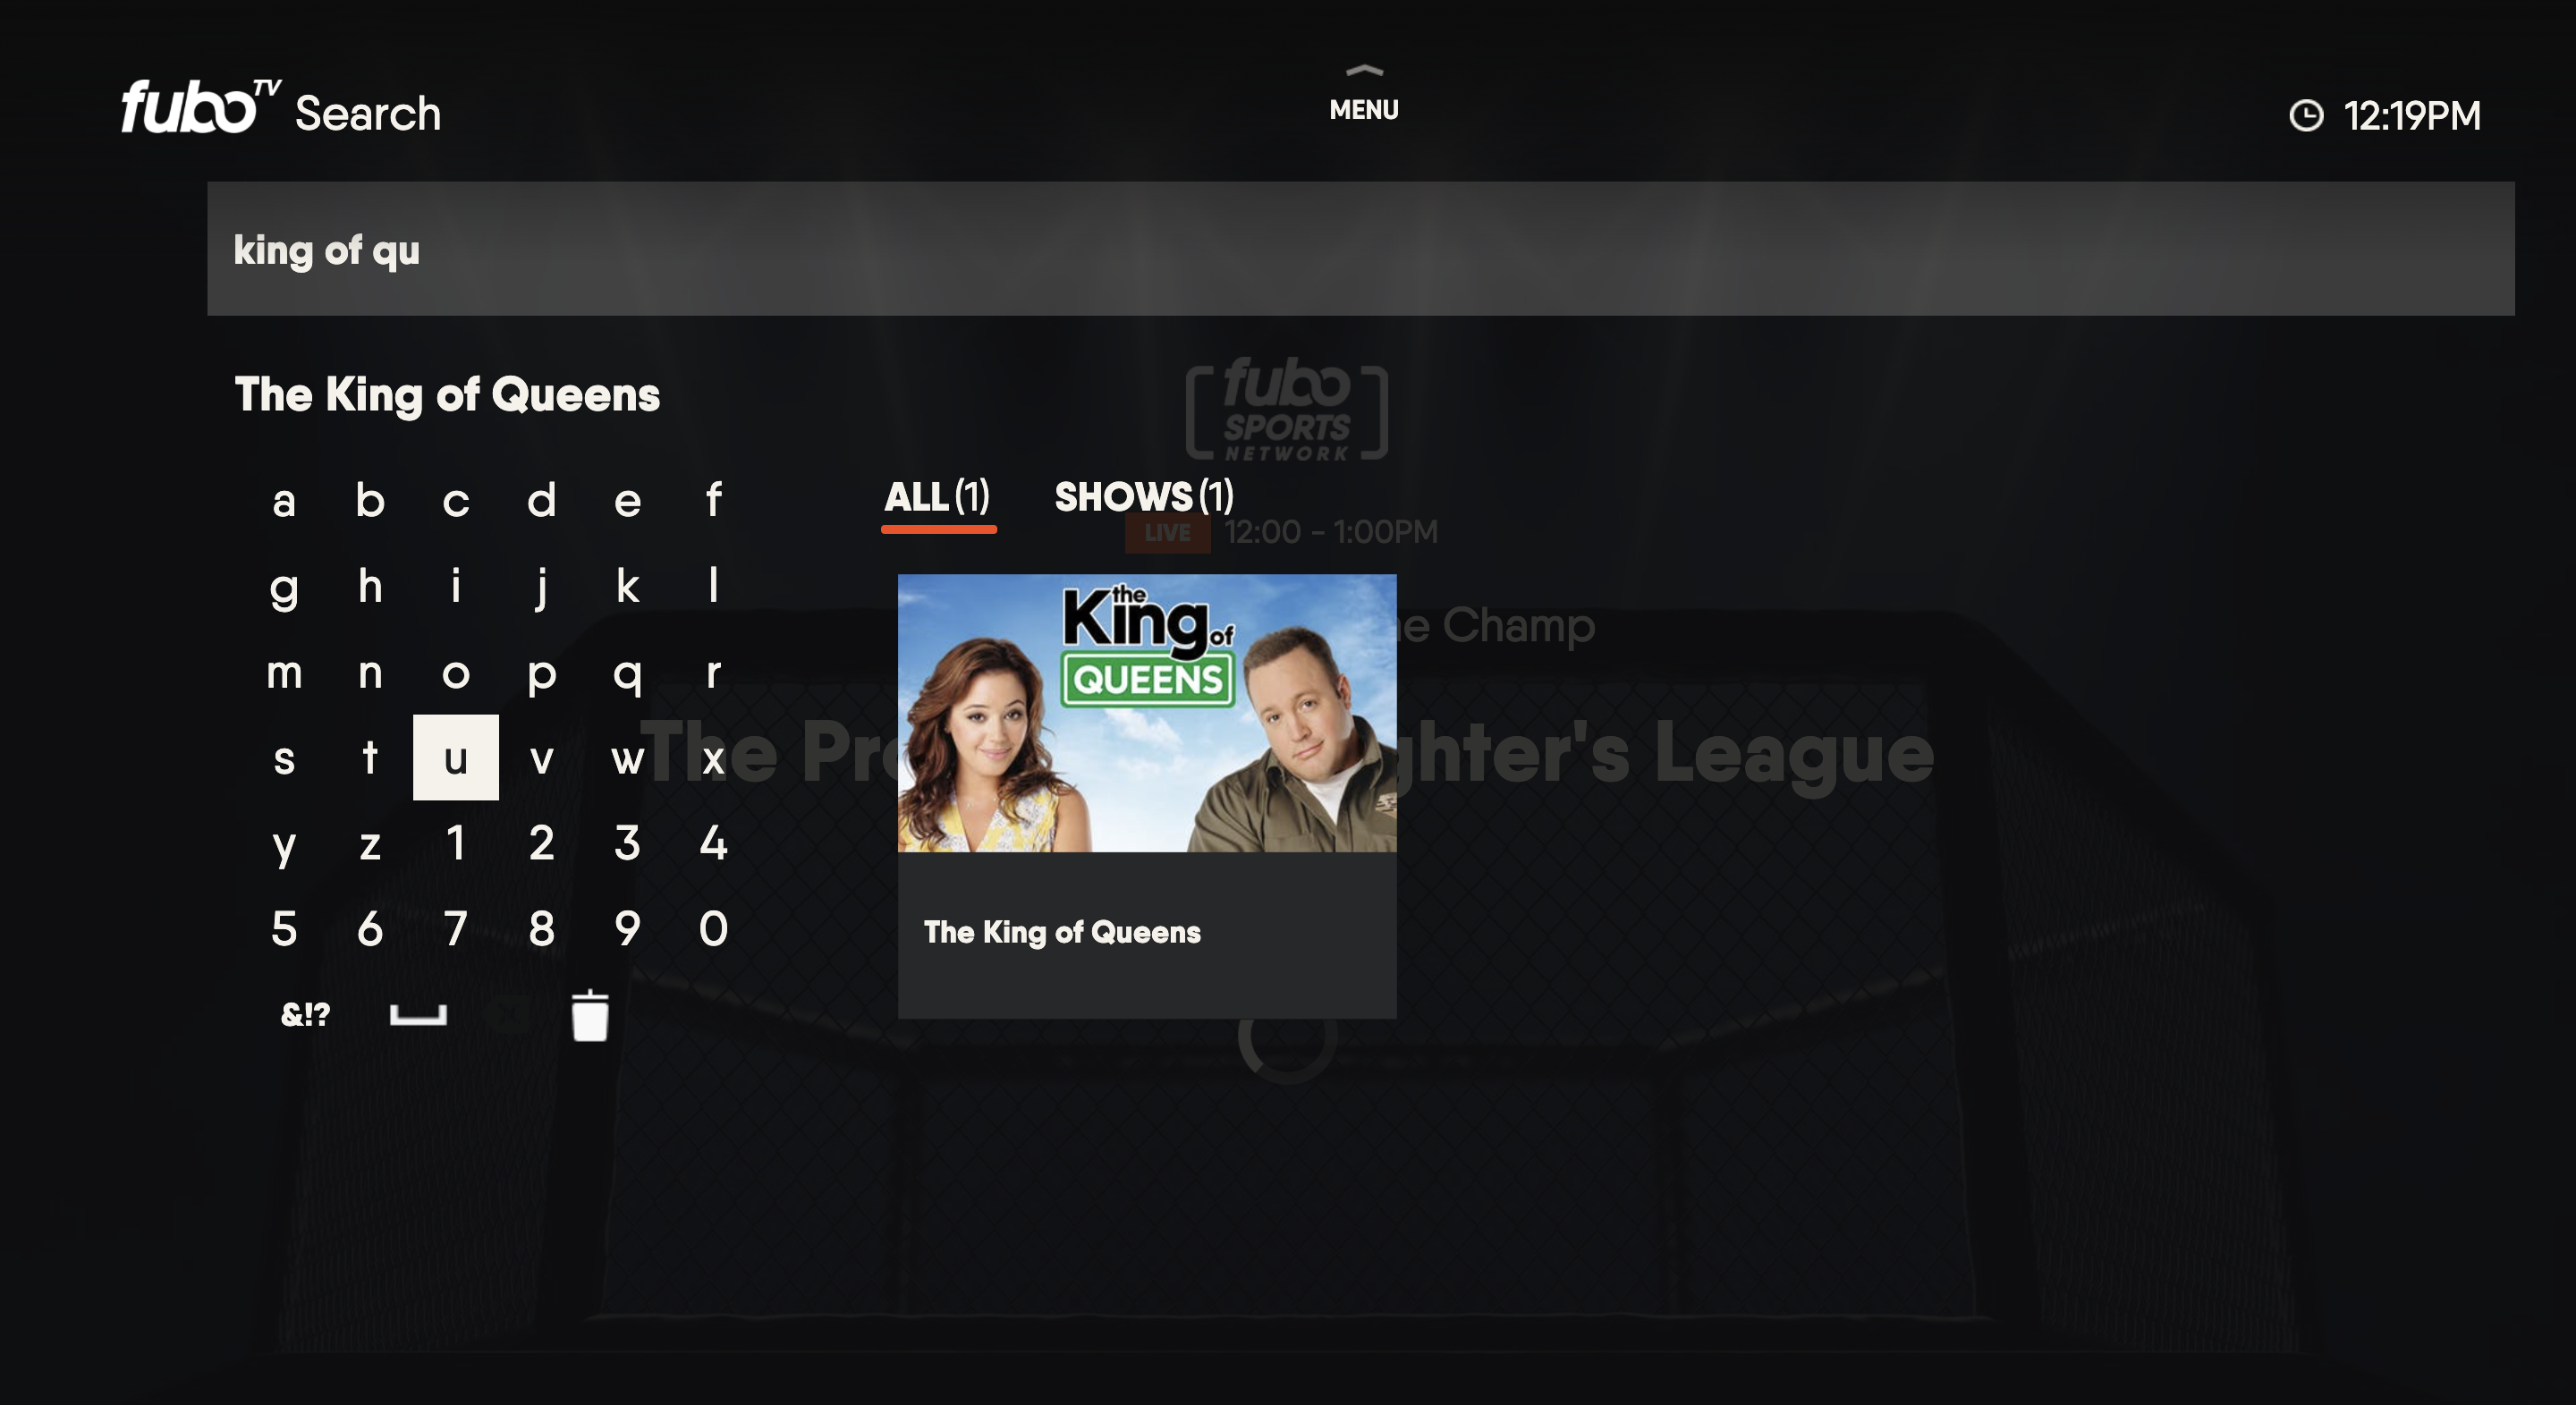 Search page of the FuboTV app on Vizio TV with on-screen keyboard